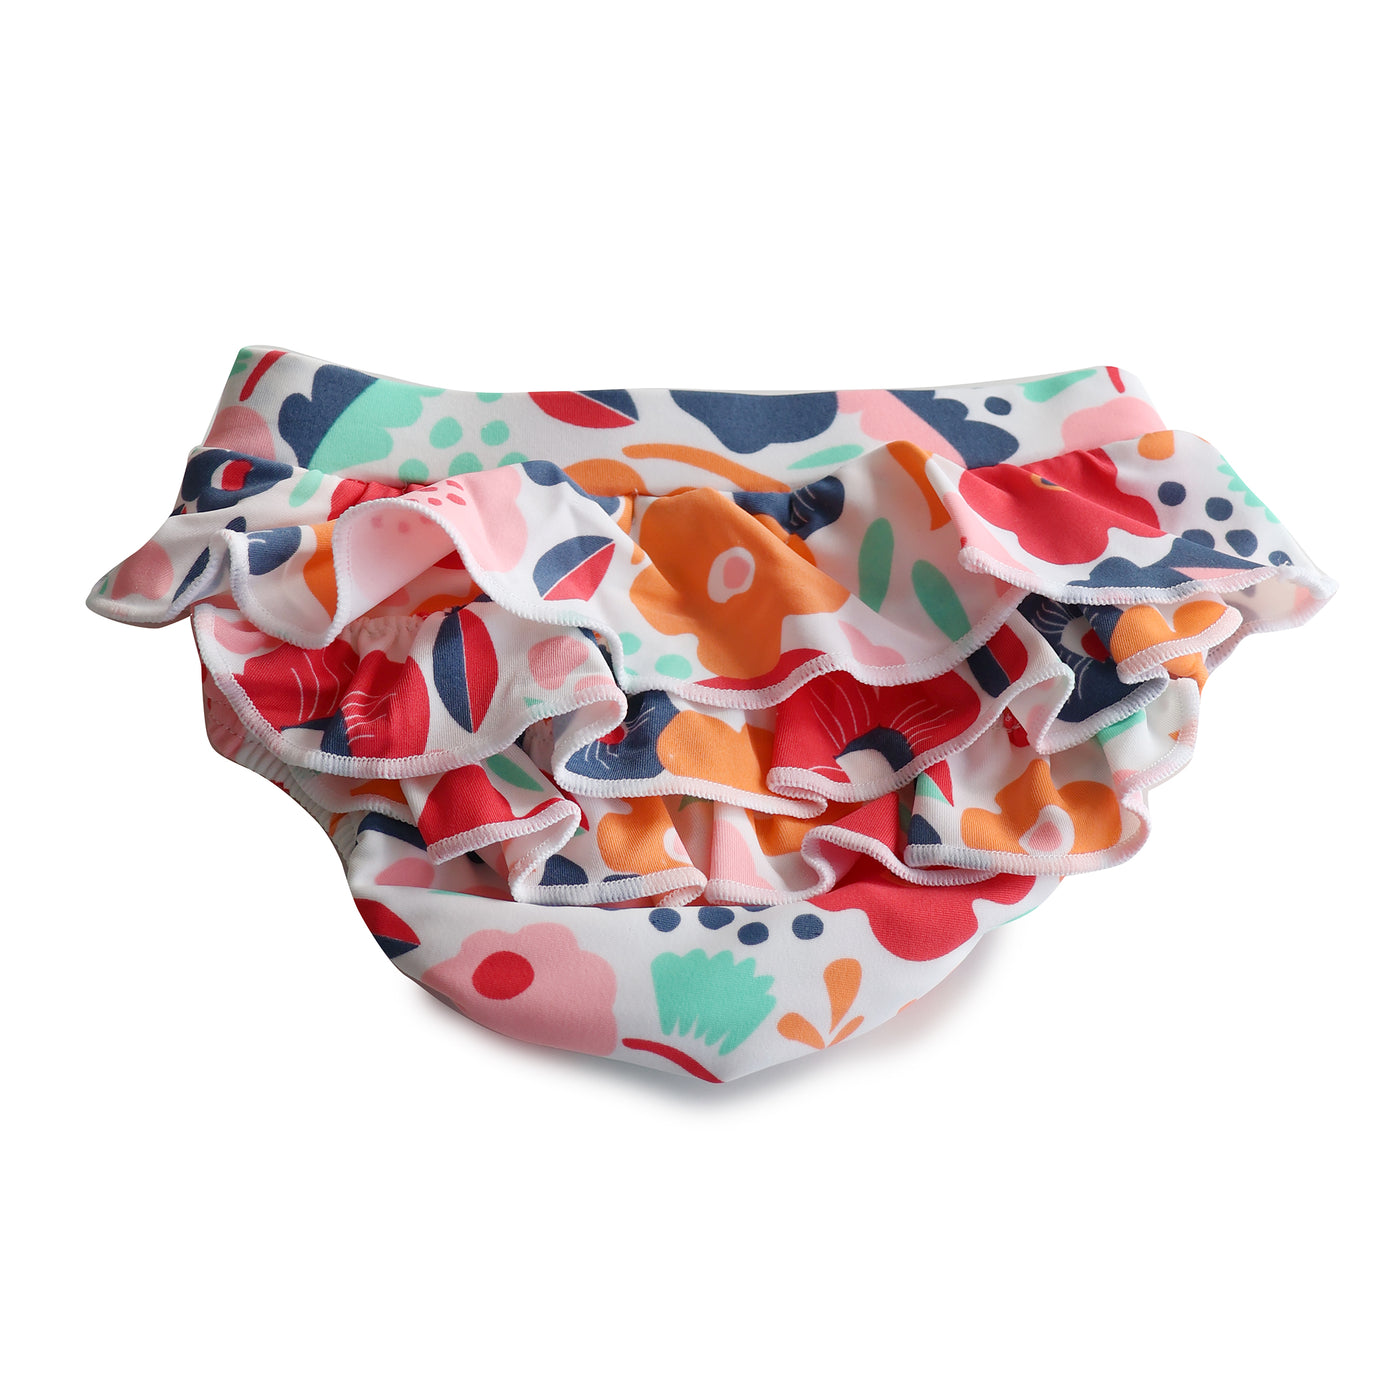 Plum Swim Nappy - Abstract Floral